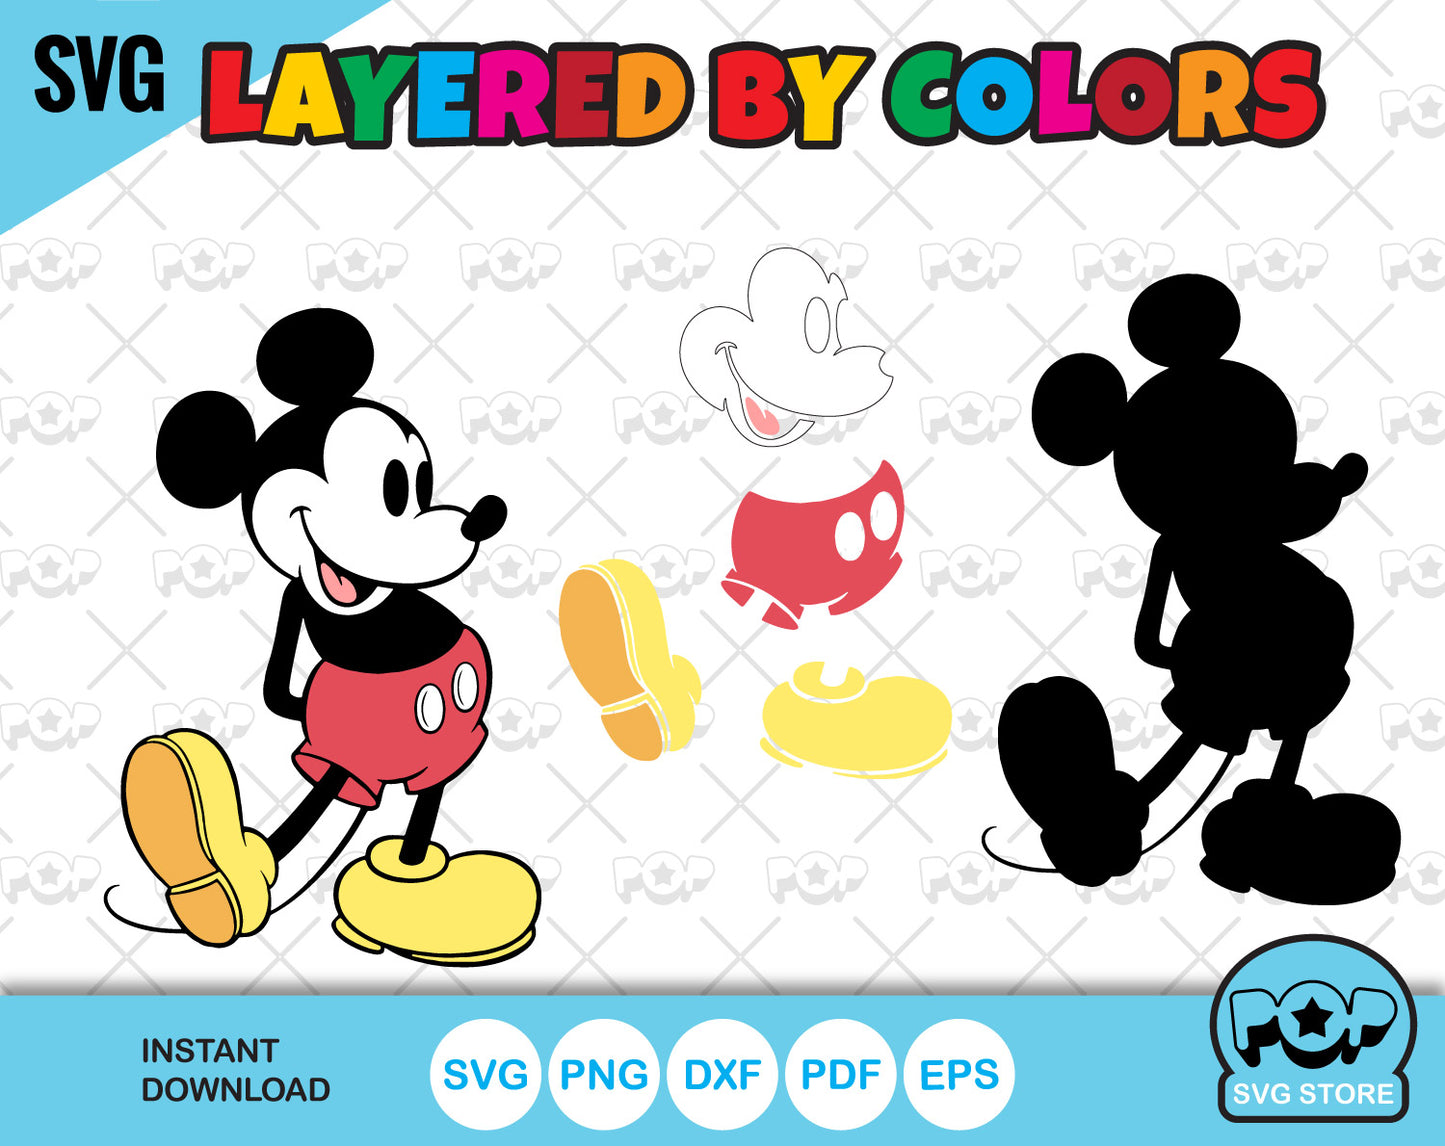 Classic Mickey Mouse 100 cliparts bundle, Mickey svg cut files for Cricut / Silhouette, Mickey Mouse png, dxf